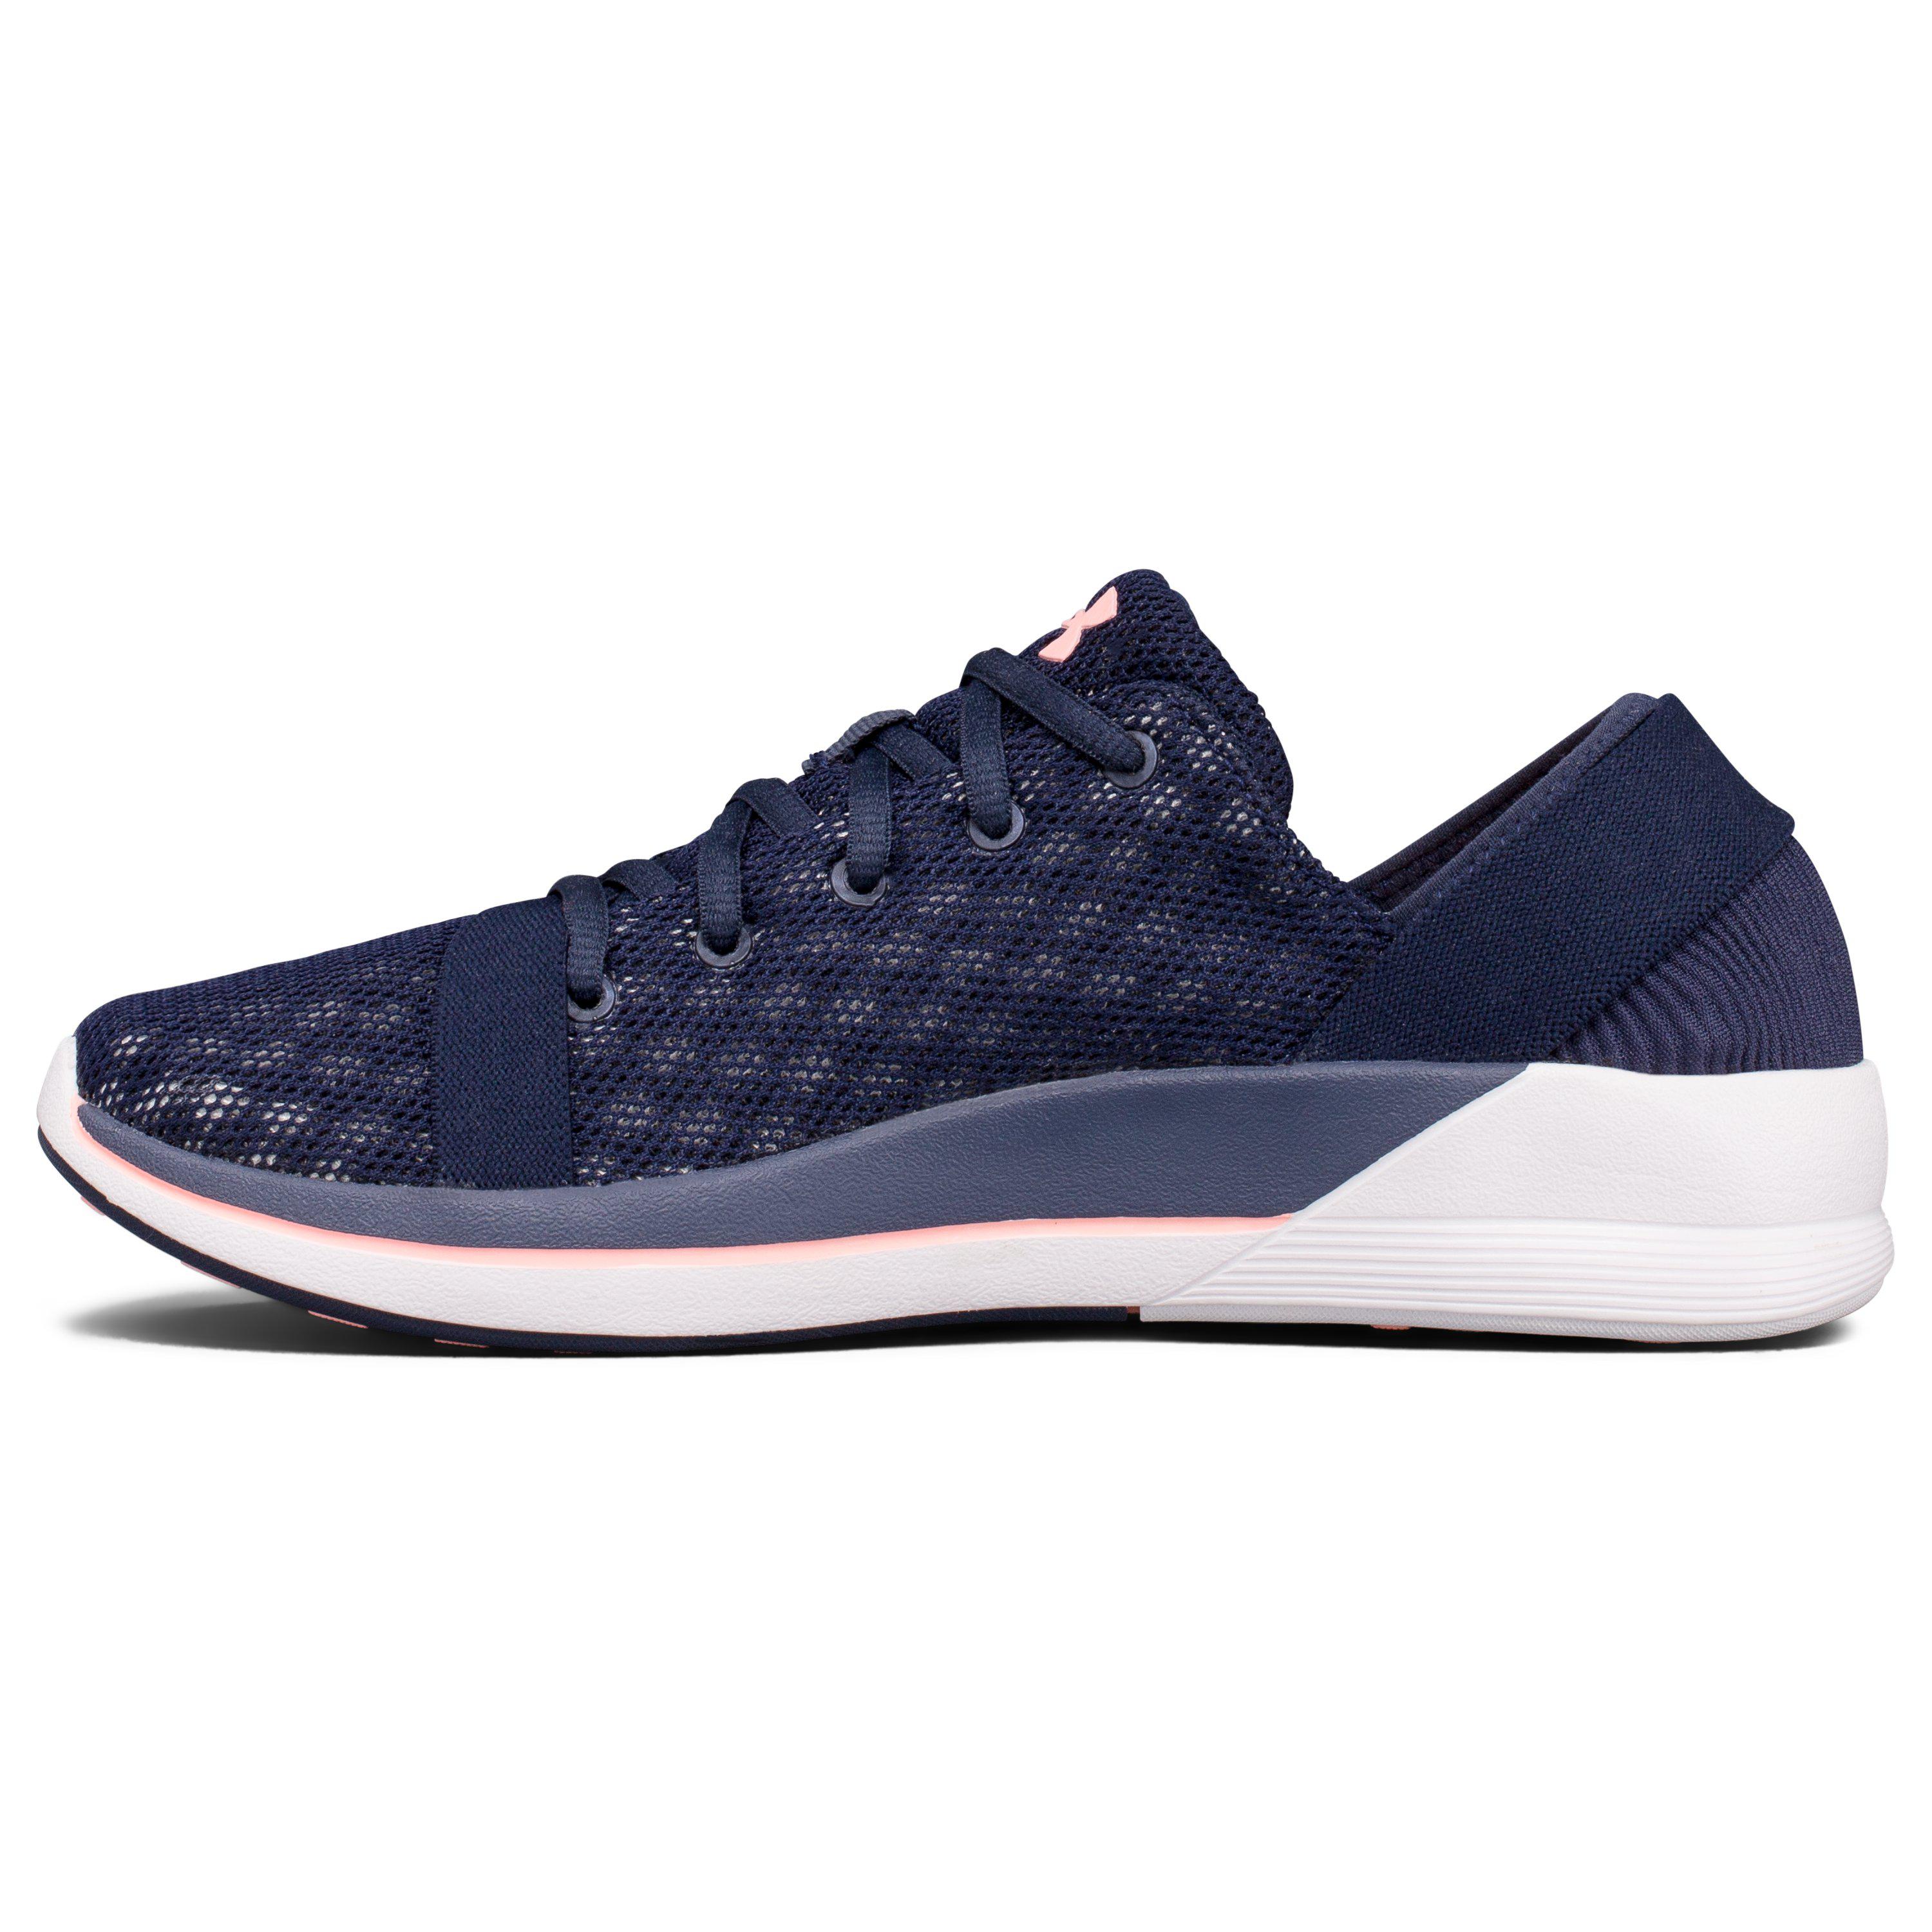 Under Armour Women's Ua Rotation Training Shoes in Blue | Lyst